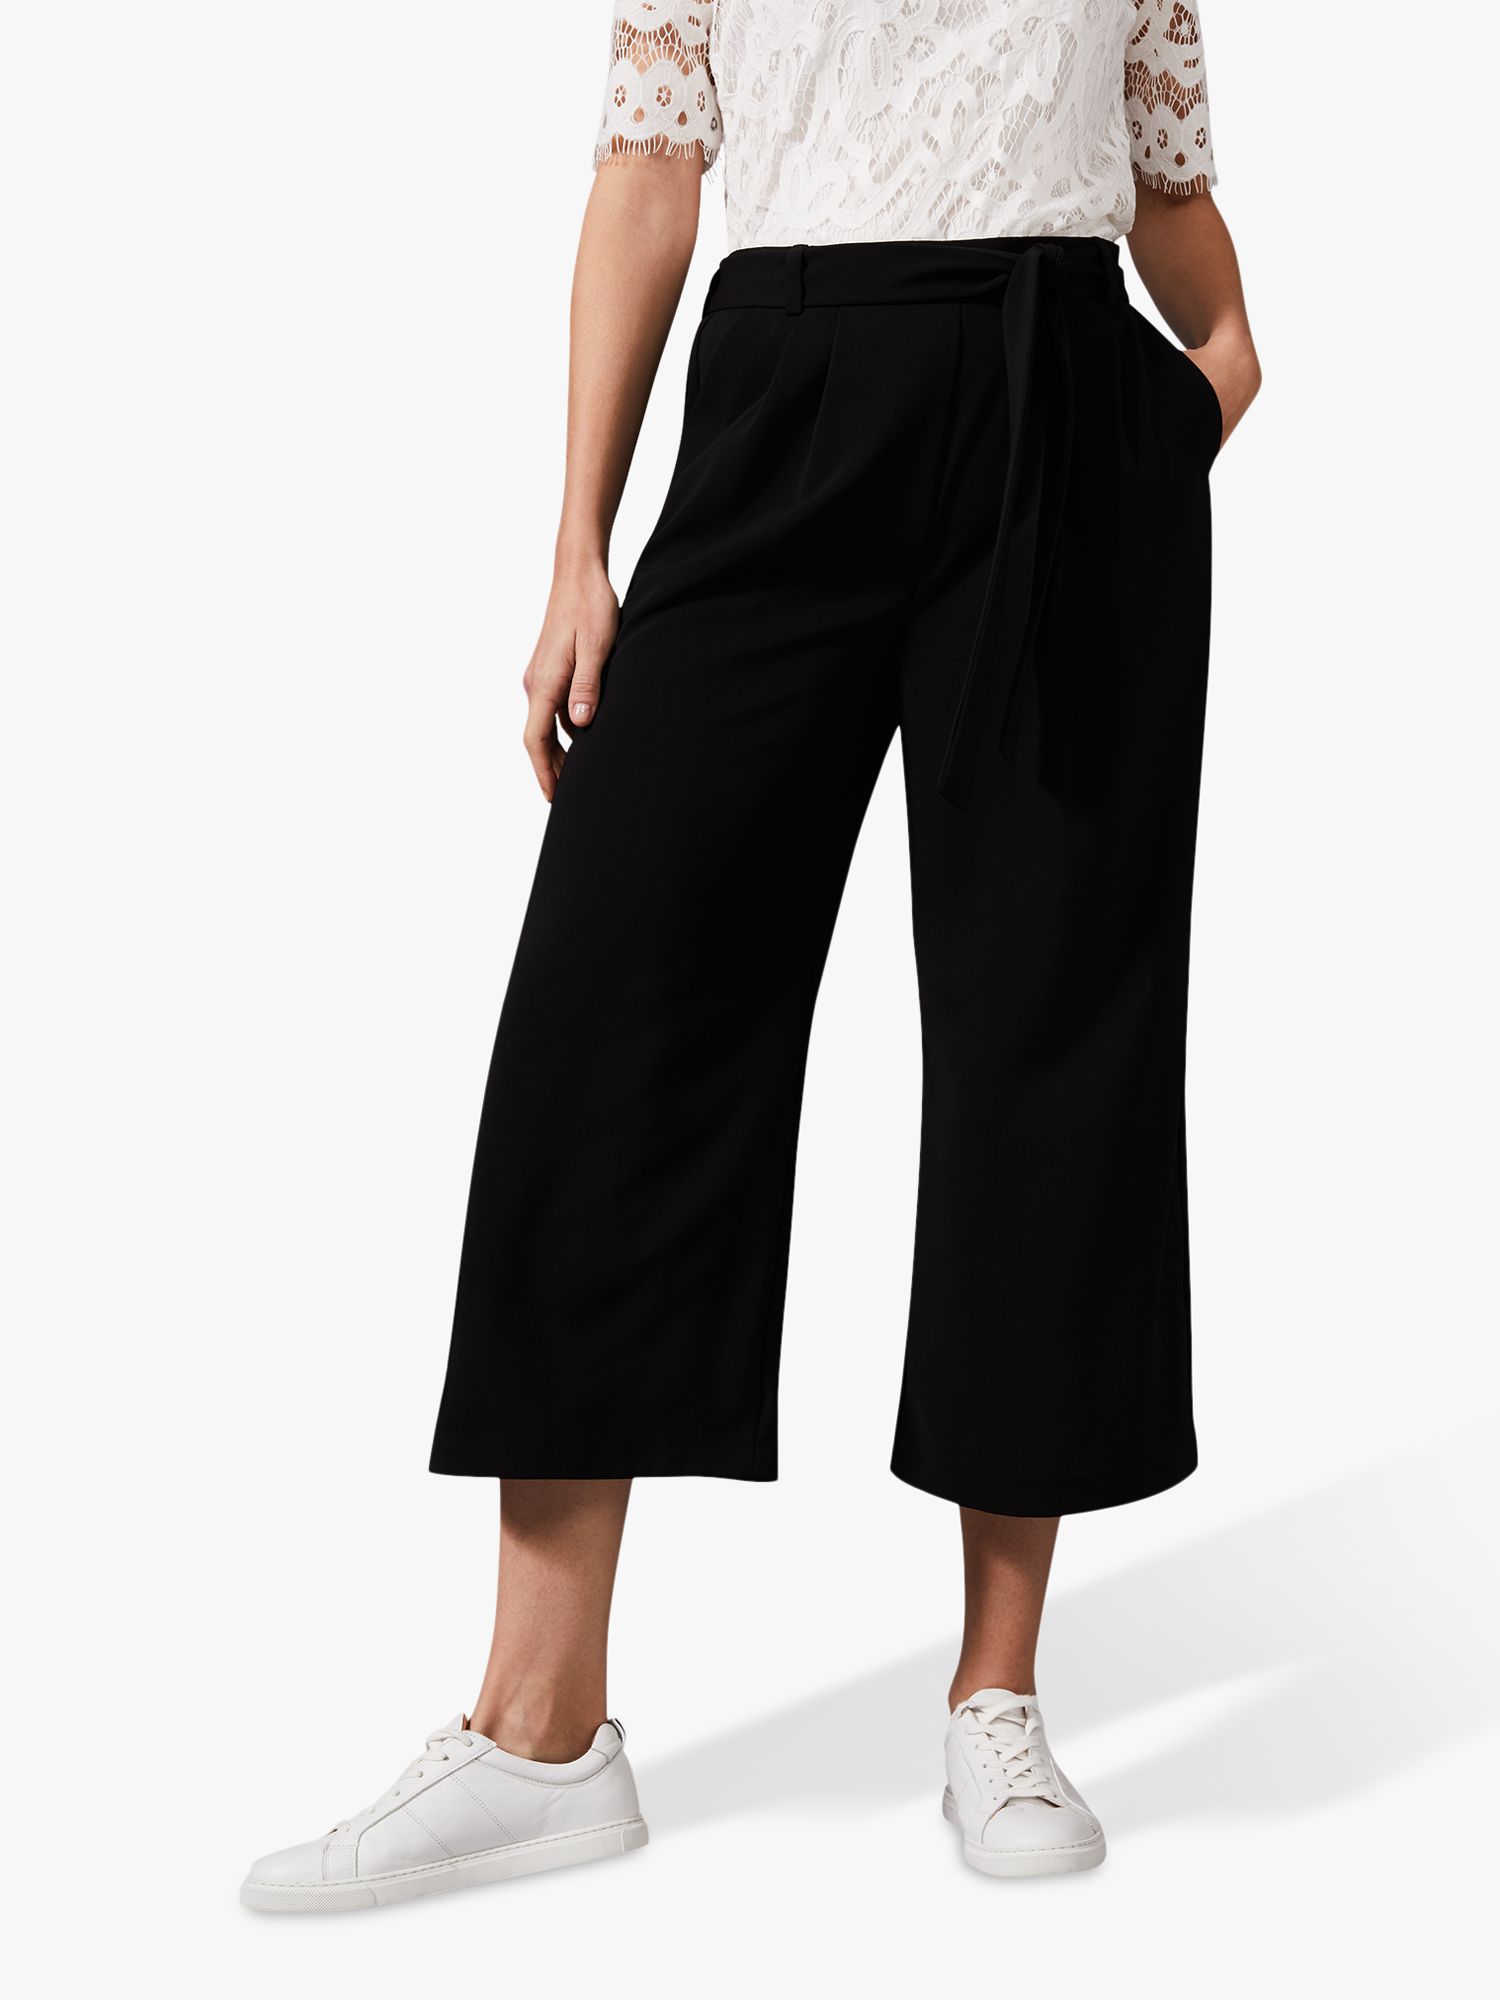 Phase Eight Magma Tie Waist Culottes, Black